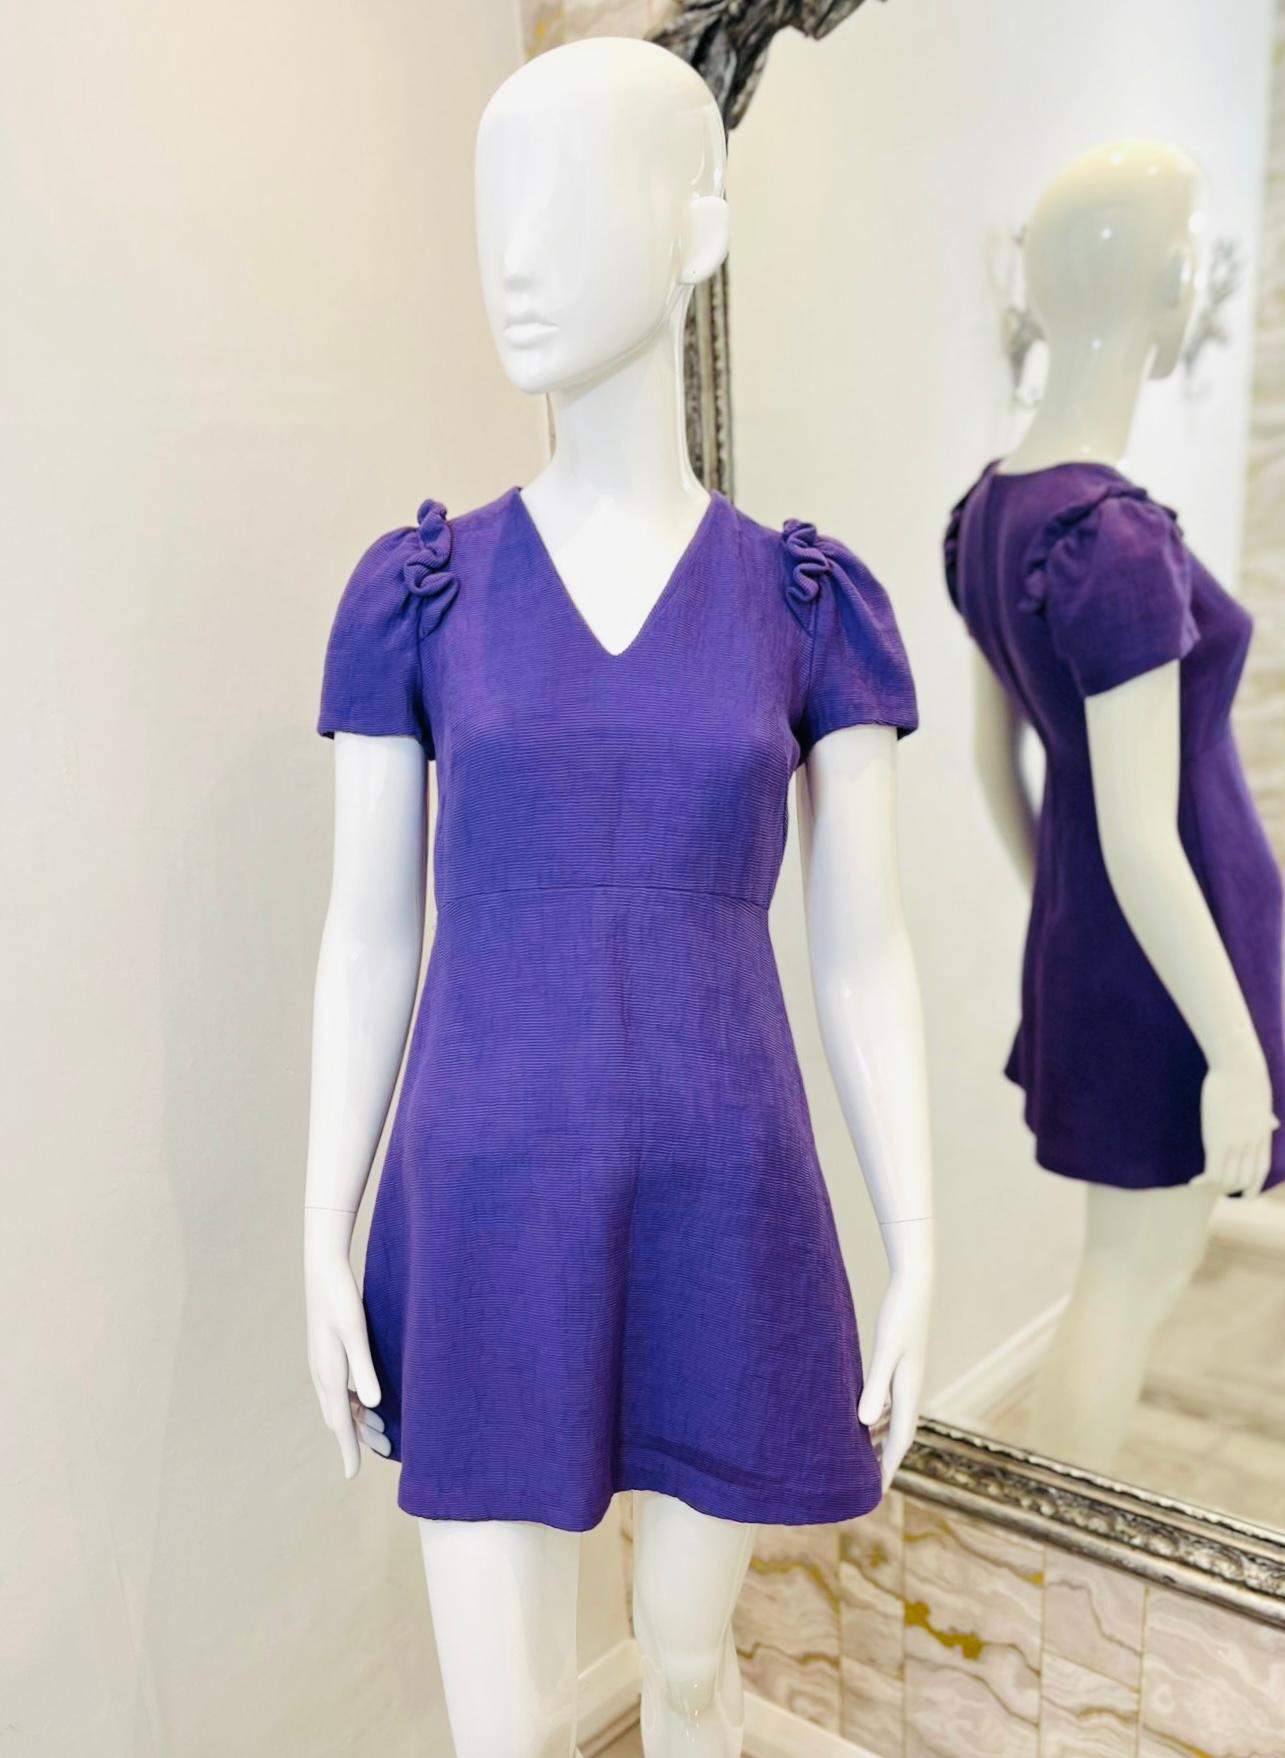 Sandro Woven Dress

Purple mini dress detailed with short, frill trimmed sleeves.

Featuring V-Neckline and A-Line silhouette. Concealed zip closure to rear. Rrp £199

Size – 36FR

Condition – Very Good (Horizontal, darker line to the bottom of the